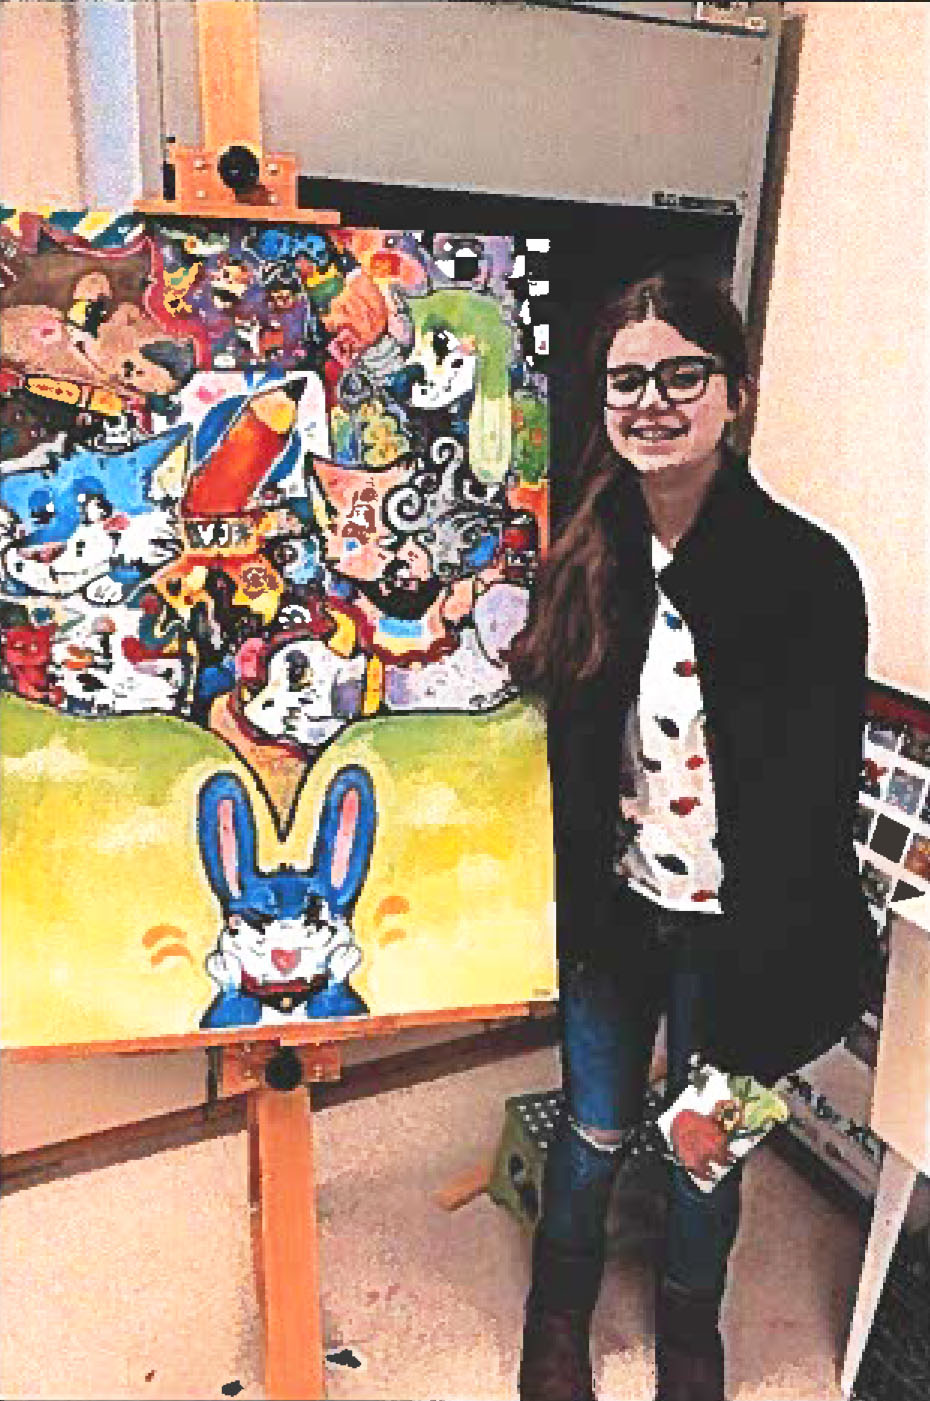 Franklin Township student places first in art contest